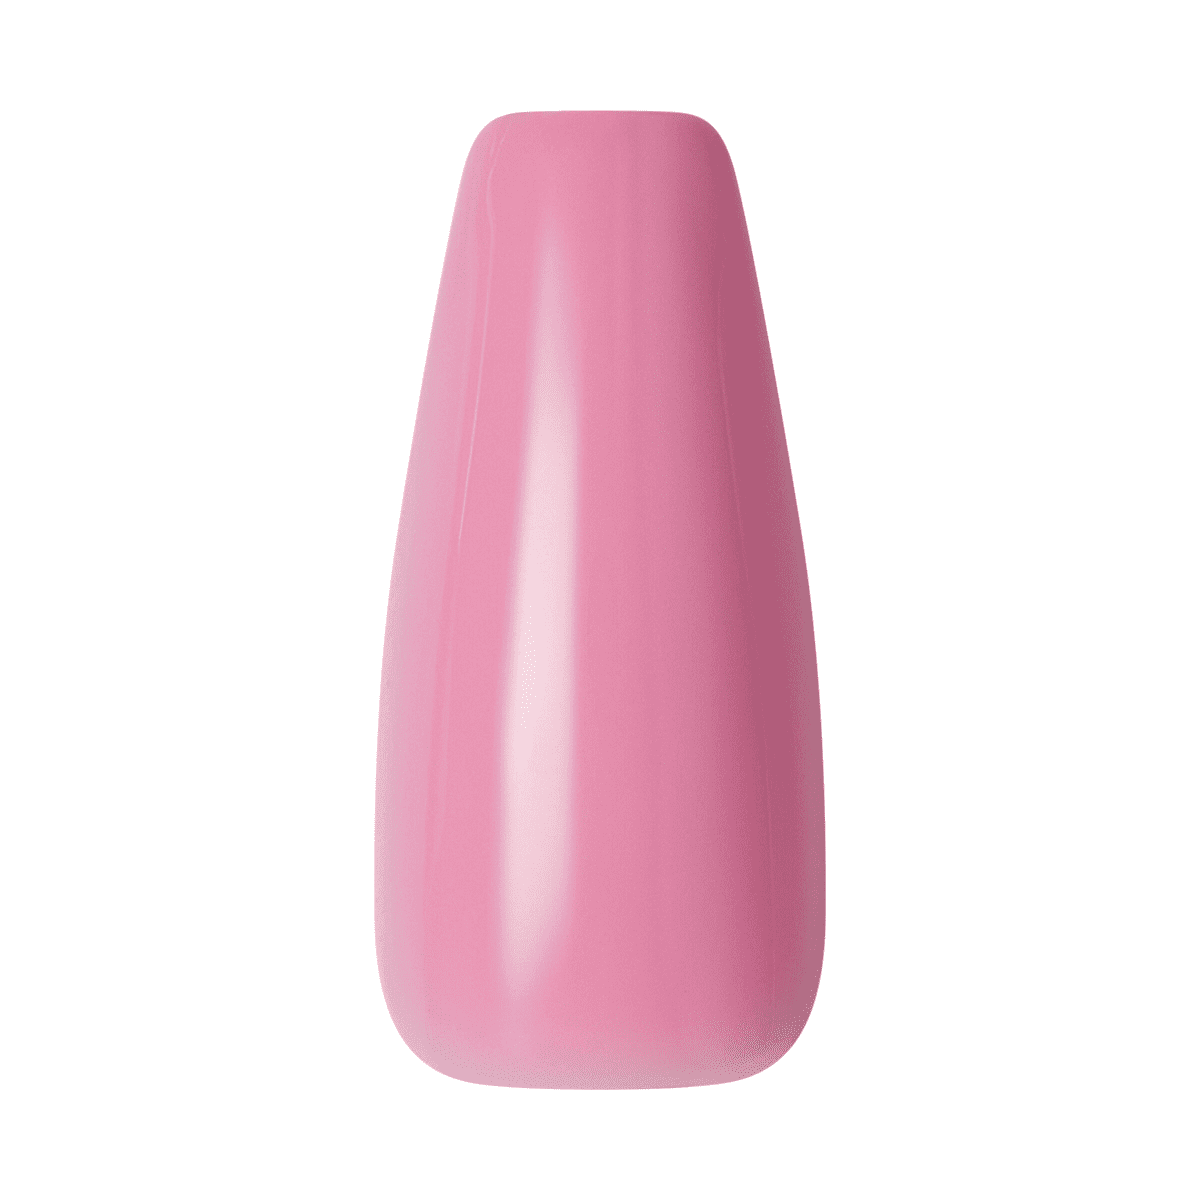 KISS Gel Fantasy, Press-On Nails, Countless Times, Pink, Long Coffin, 28ct